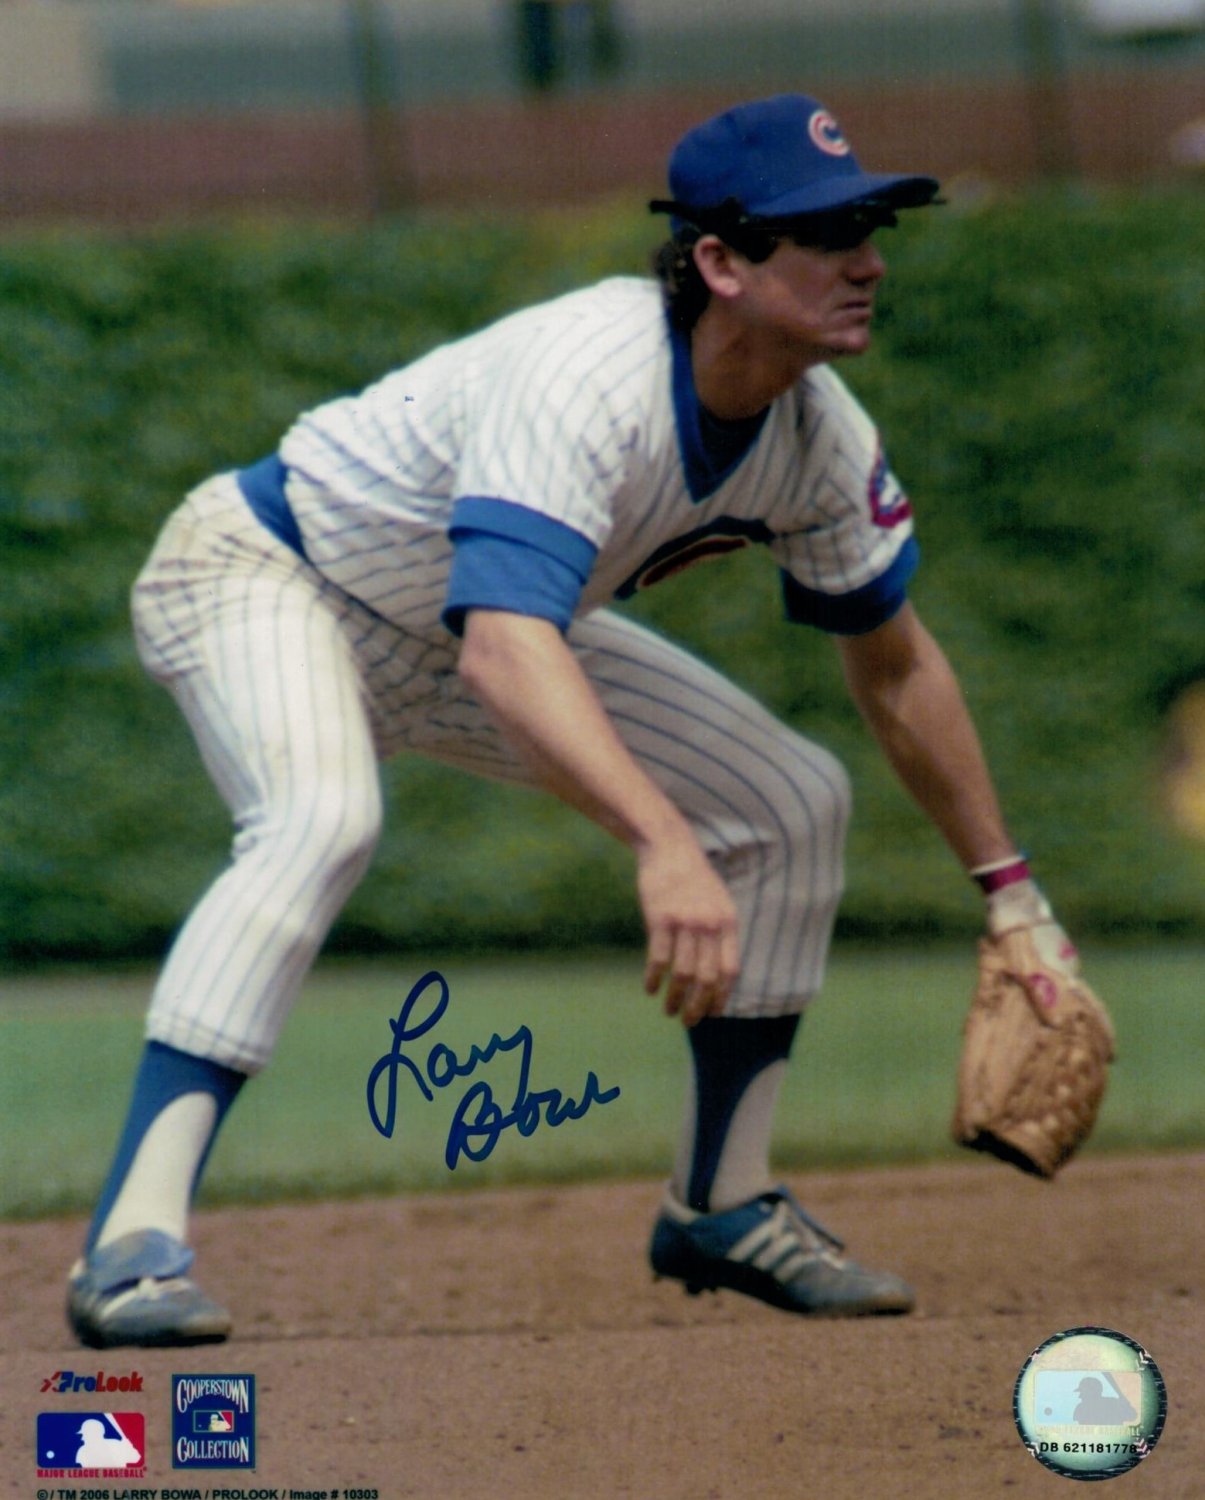 Larry Bowa Chicago Cubs Autographed Signed 8x10 Photo - Certified